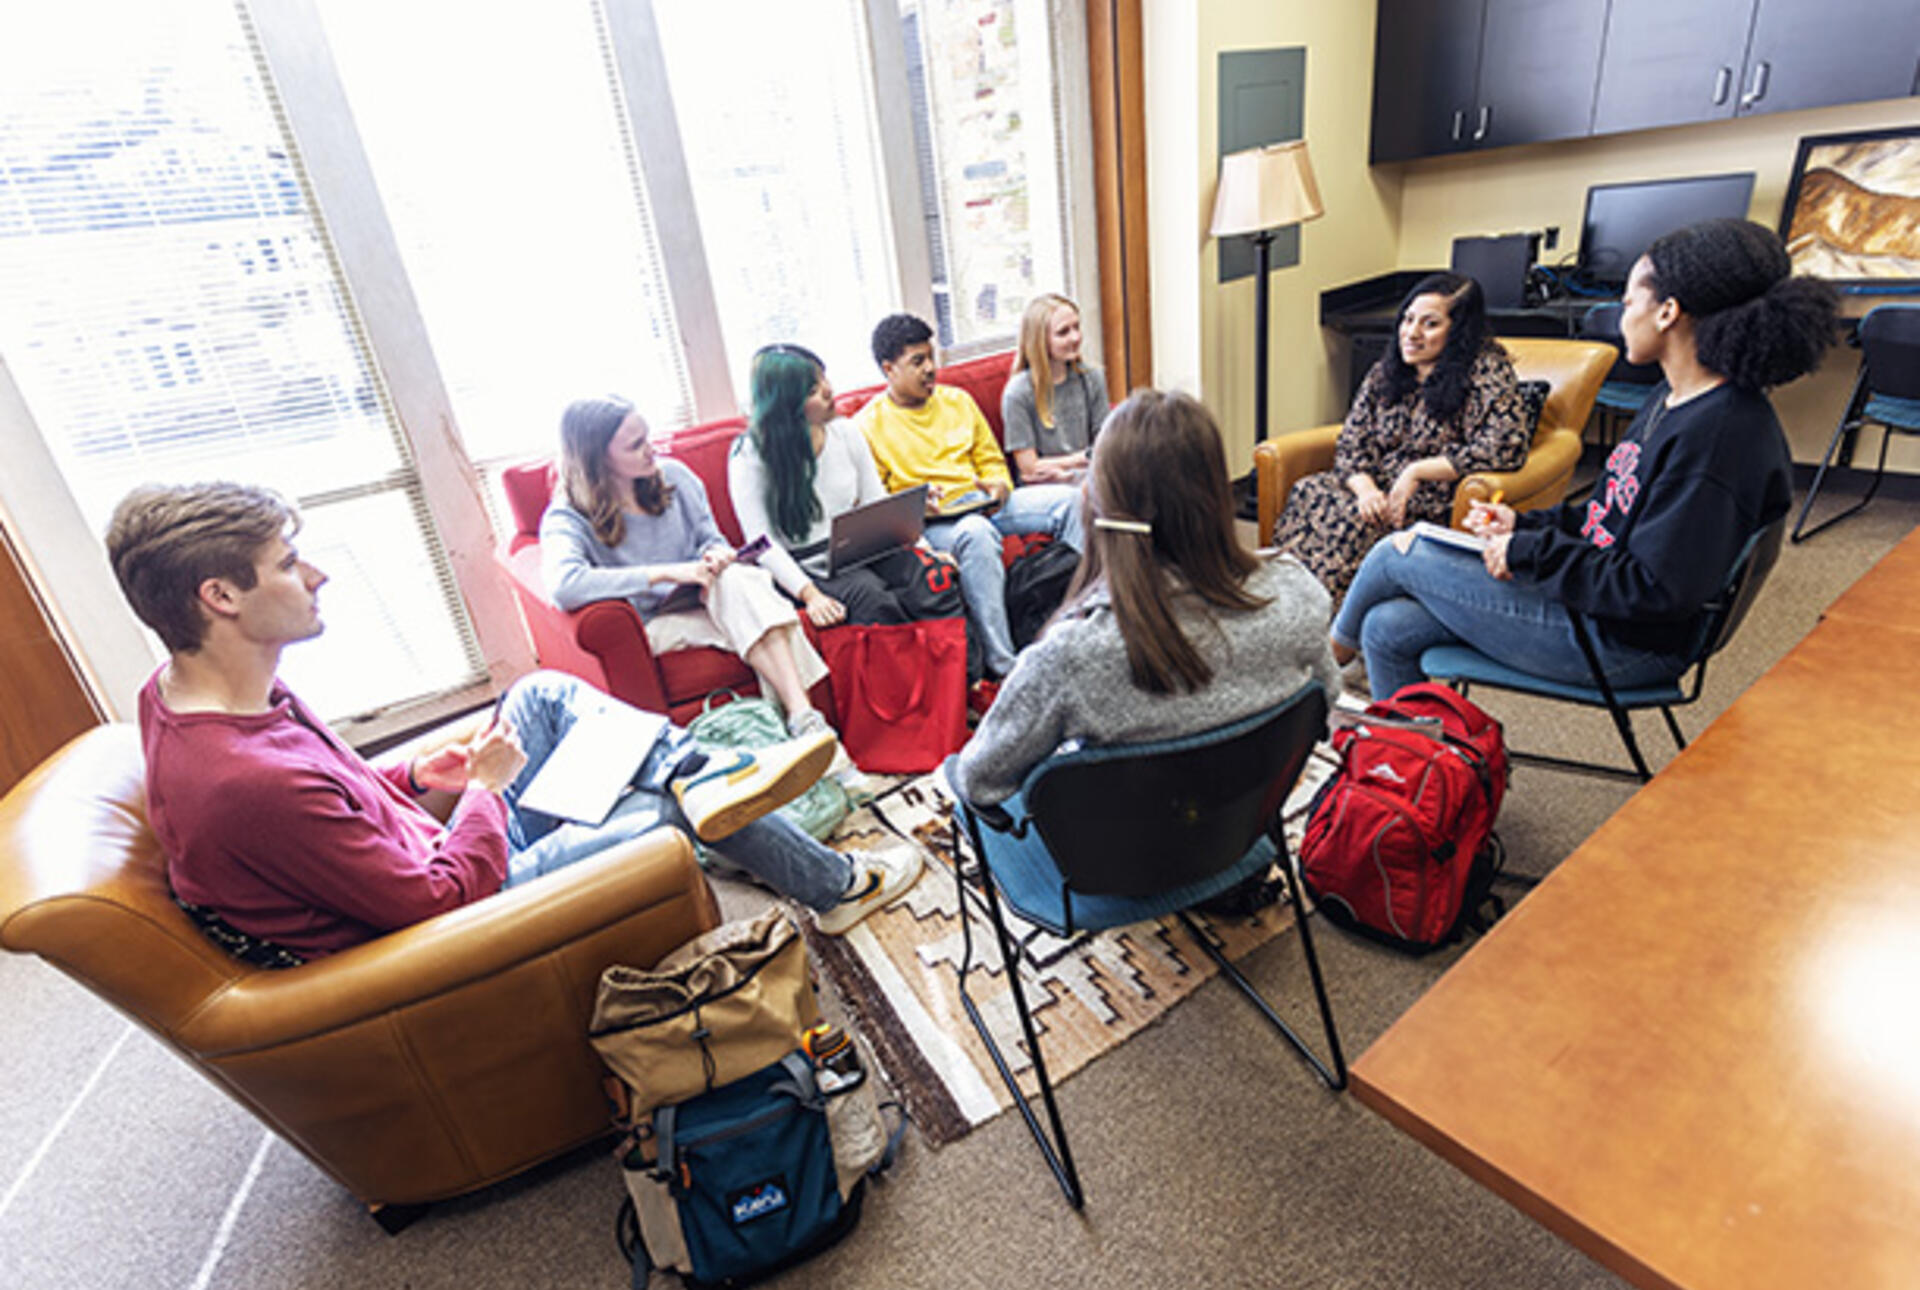 a female professor leads a discussion with a group of students